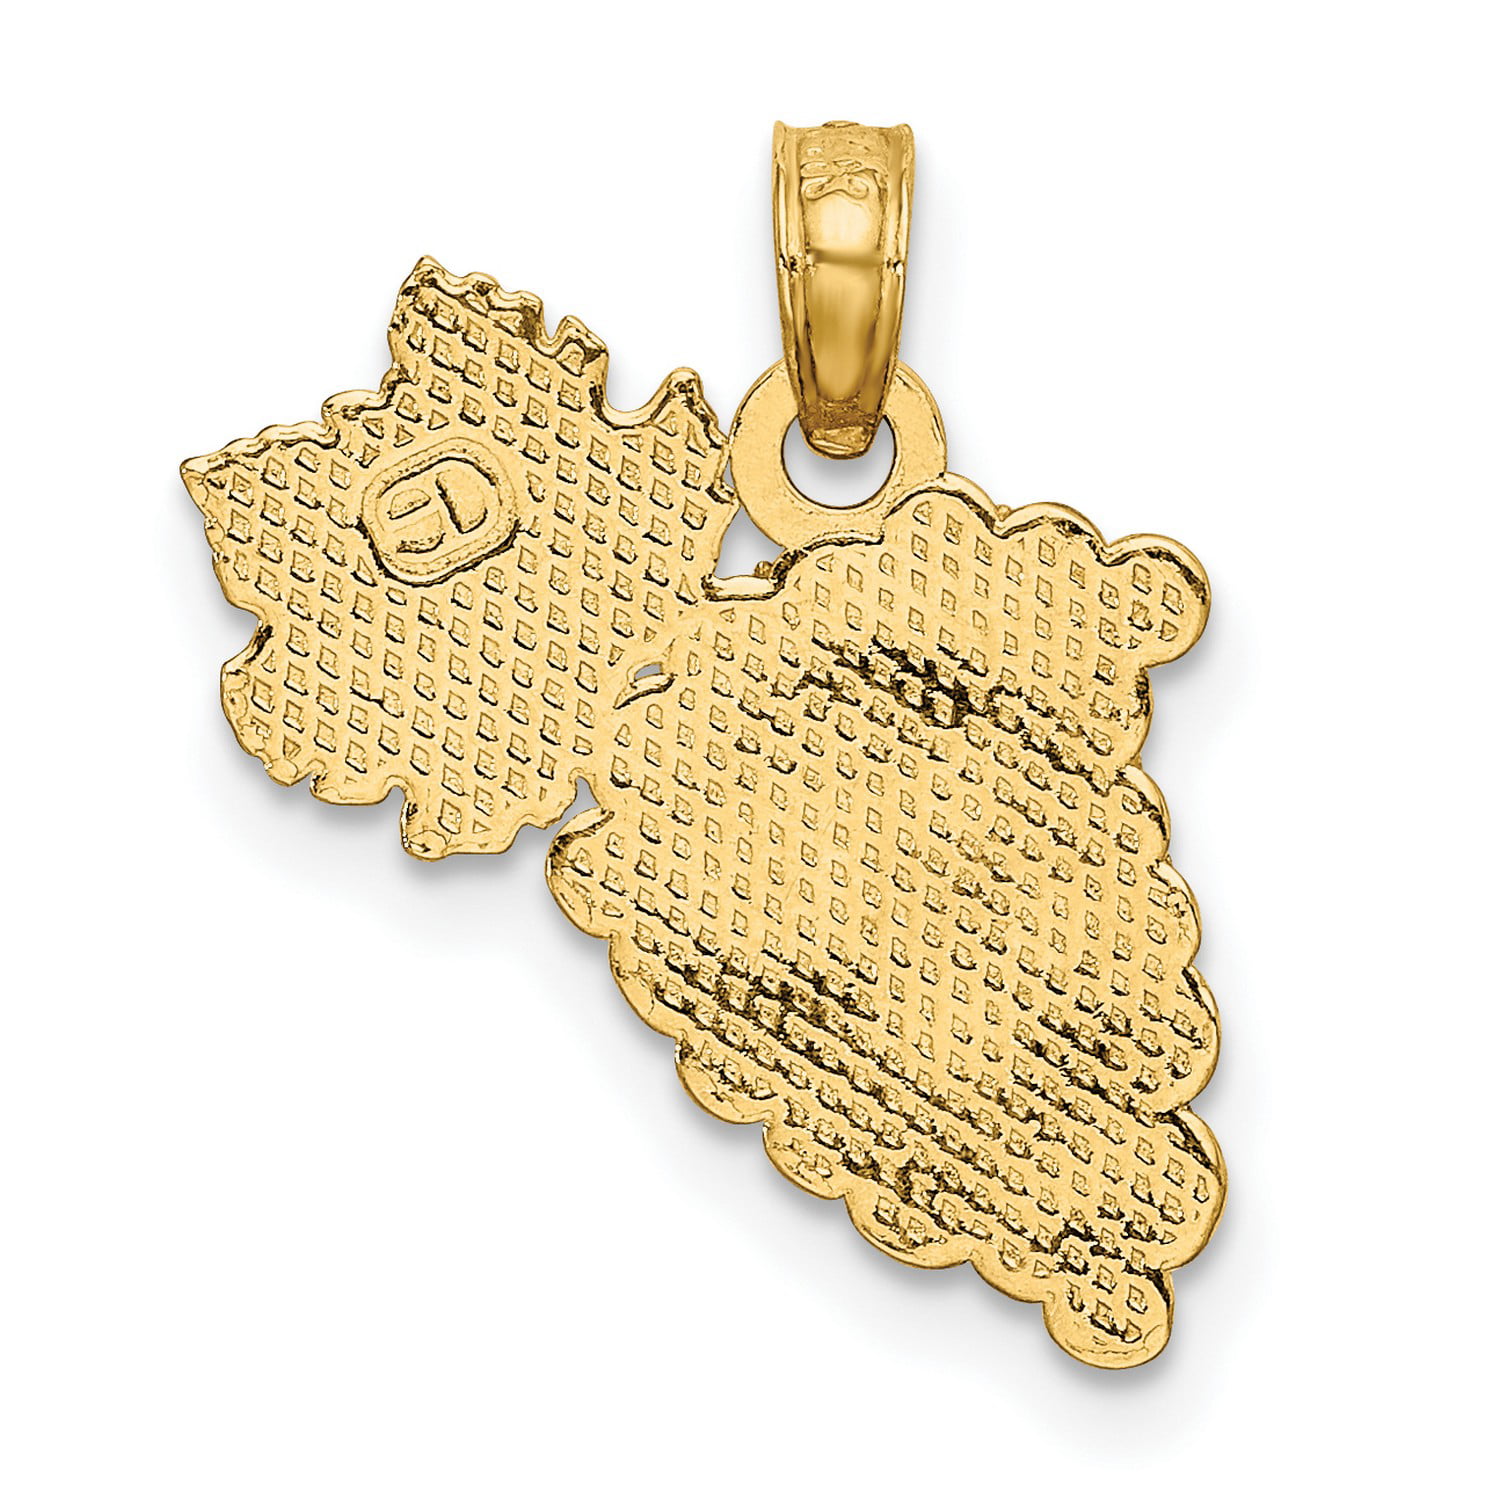 Details about   New Real Solid 14K Gold Grapes Charm 